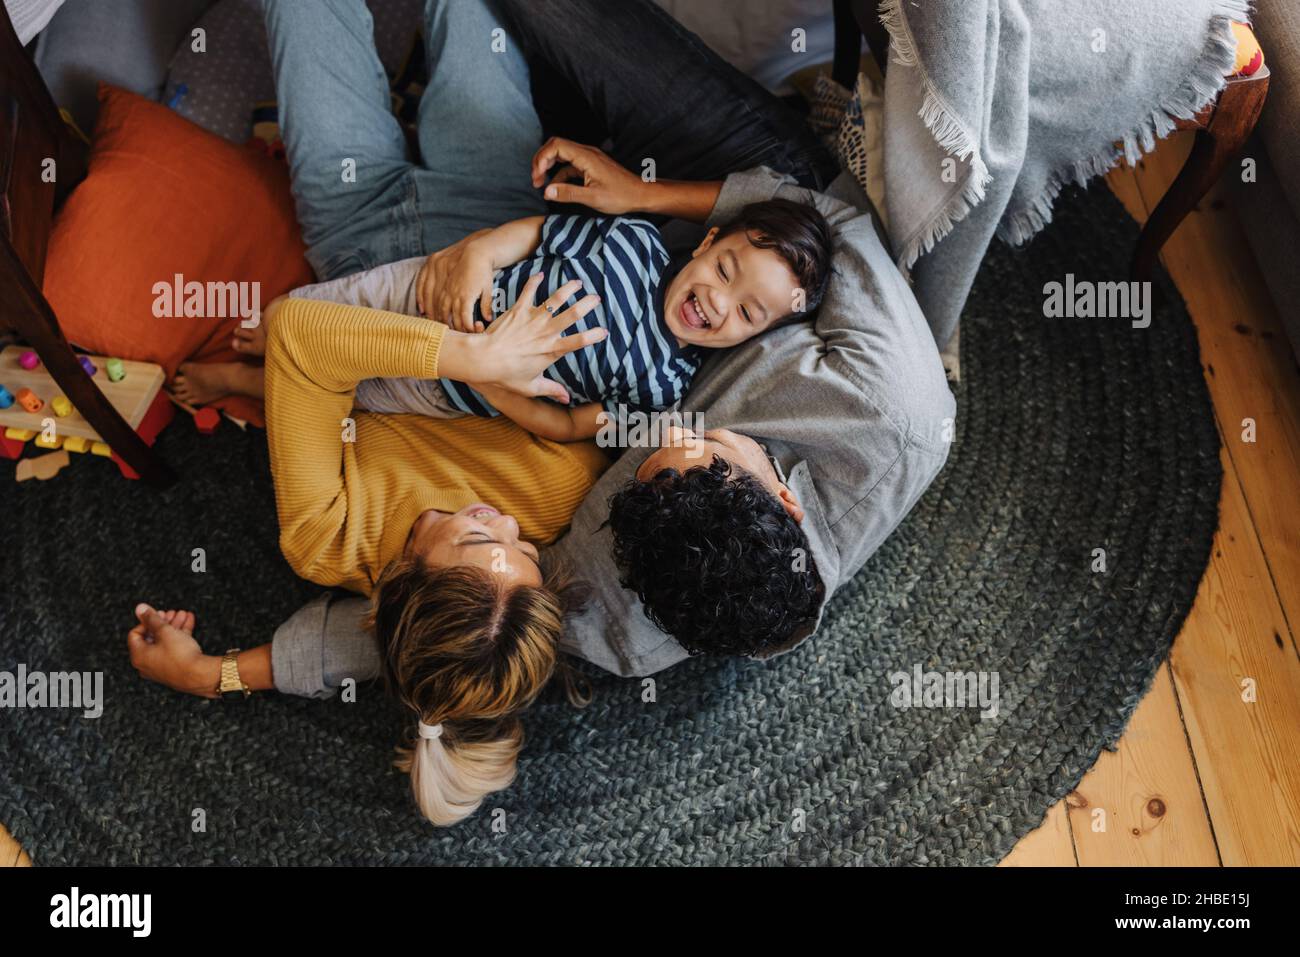 Overhead view of a little boy having fun with his mom and dad in their play area. Young boy laughing cheerfully while lying on top of his parents. Fam Stock Photo